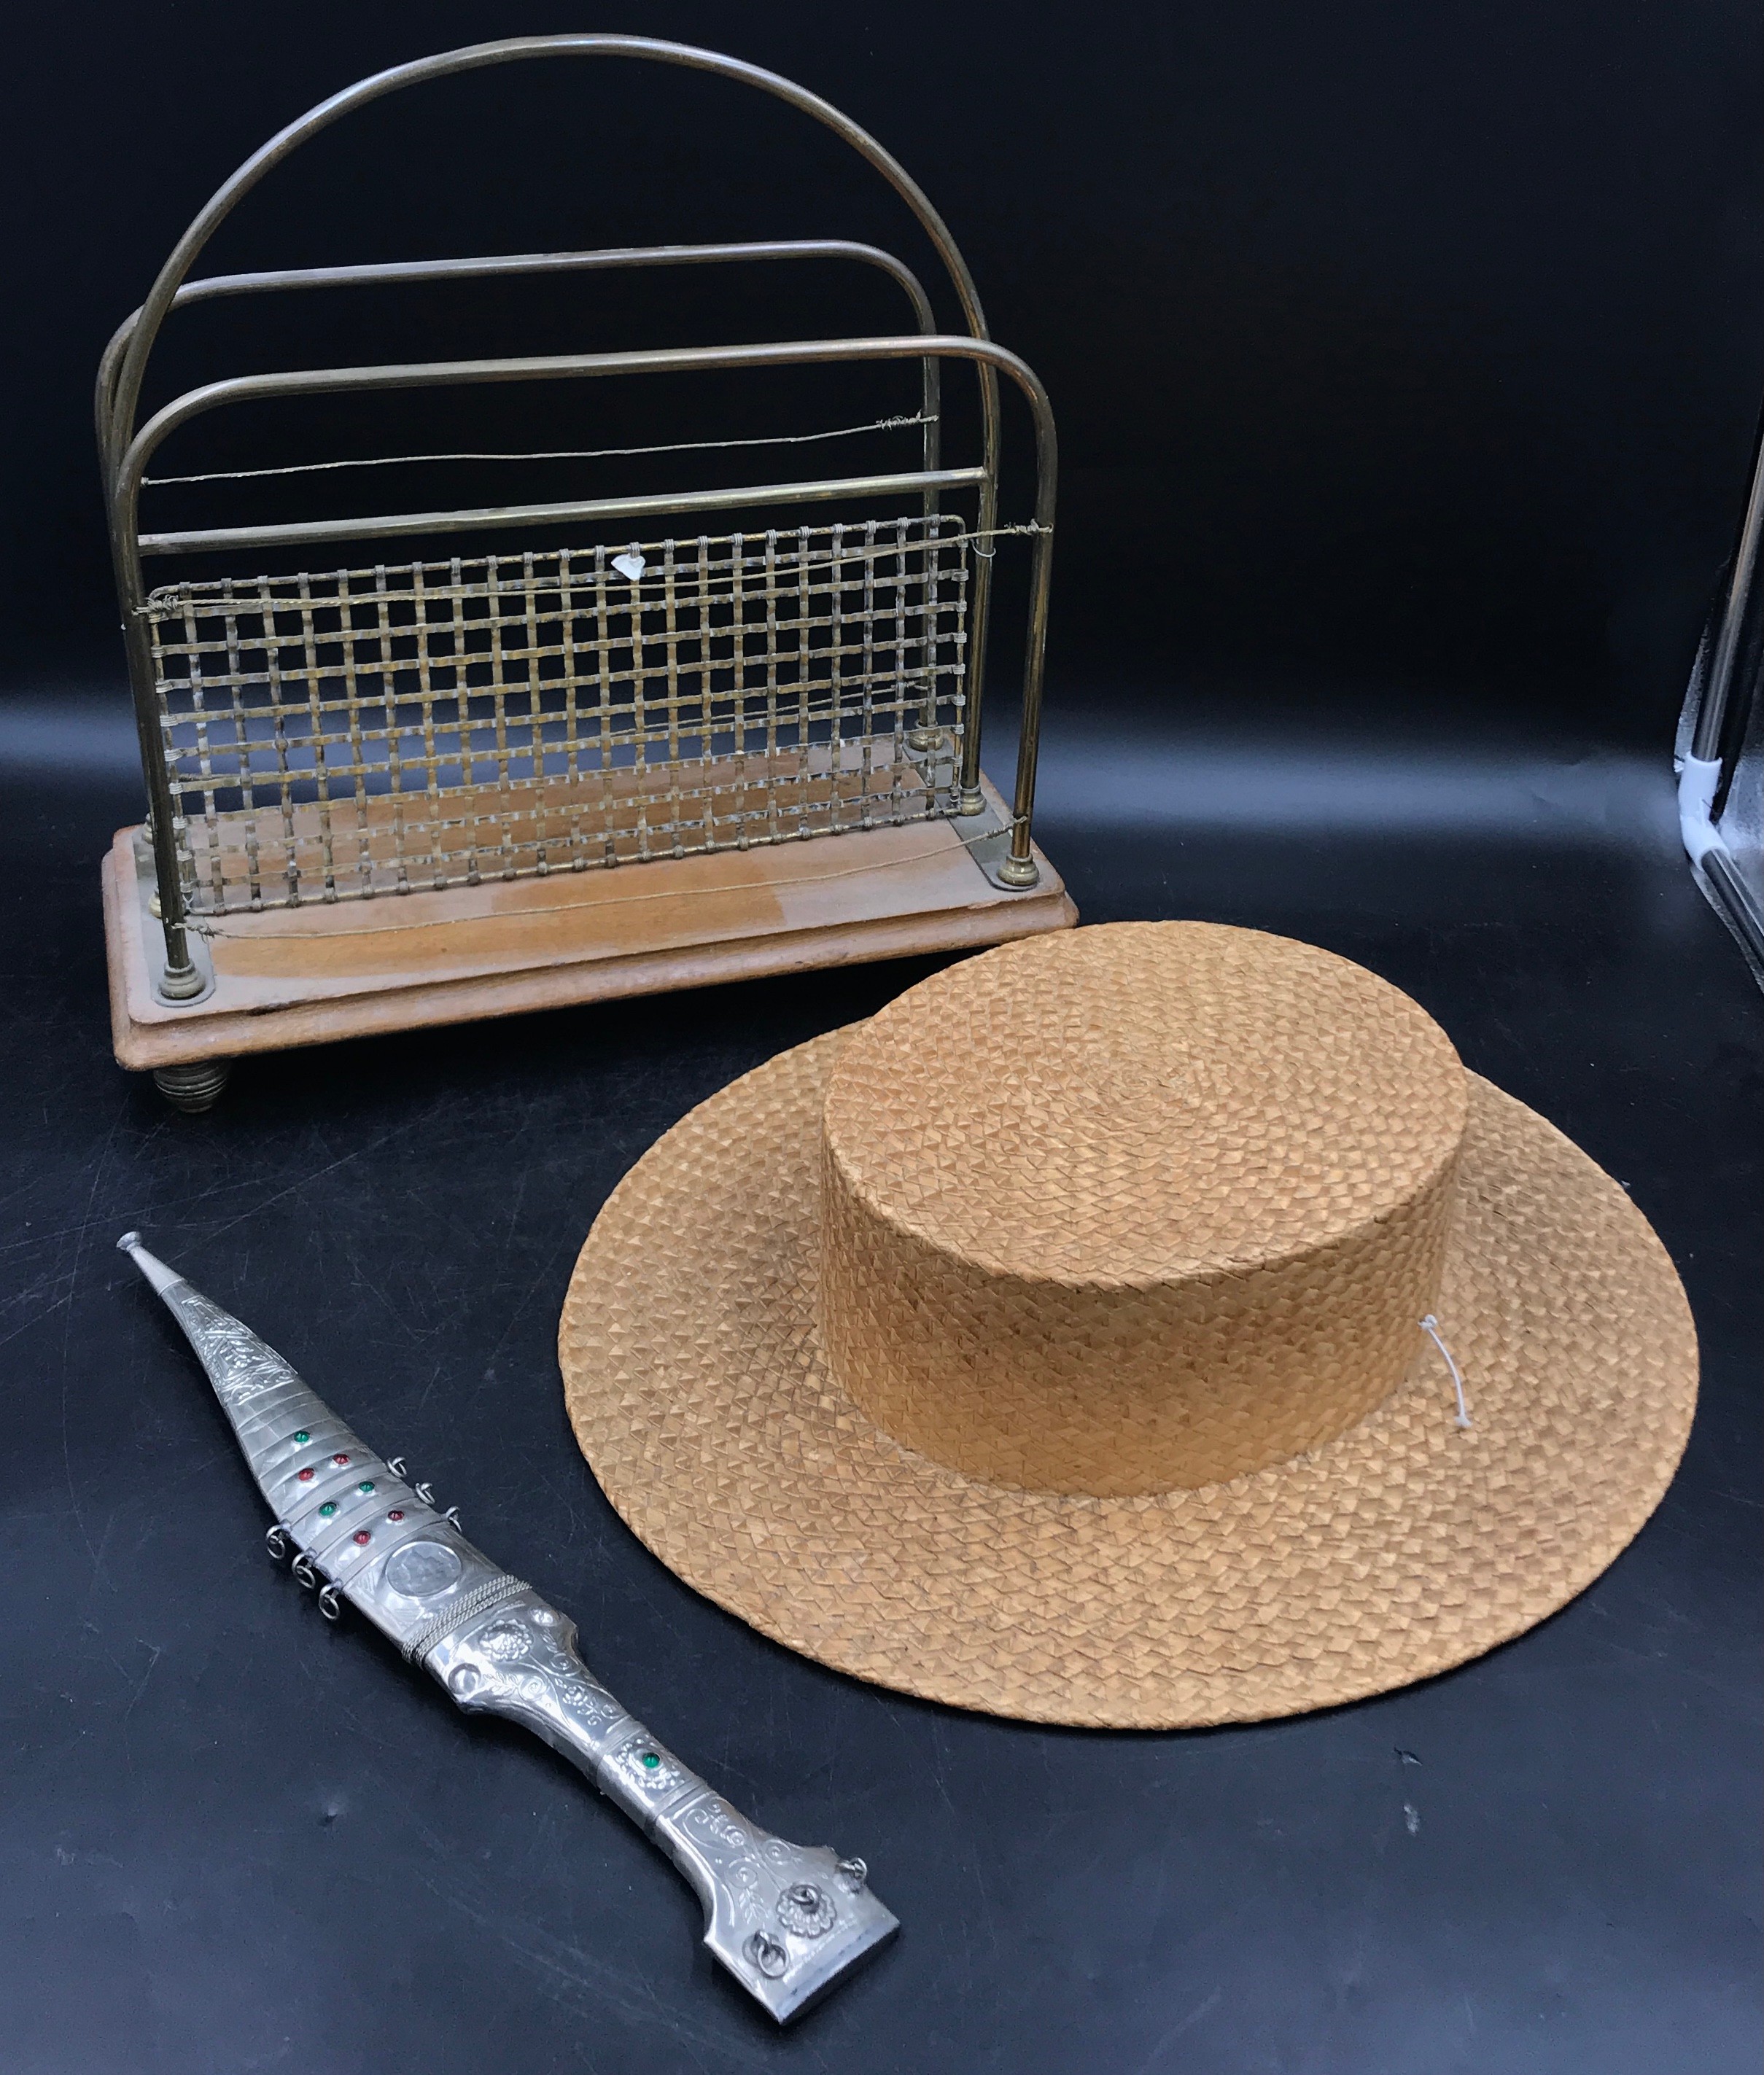 A vintage 1930's Ridgmont straw school hat "The Harrogate" from Monmouth Girls School along with a